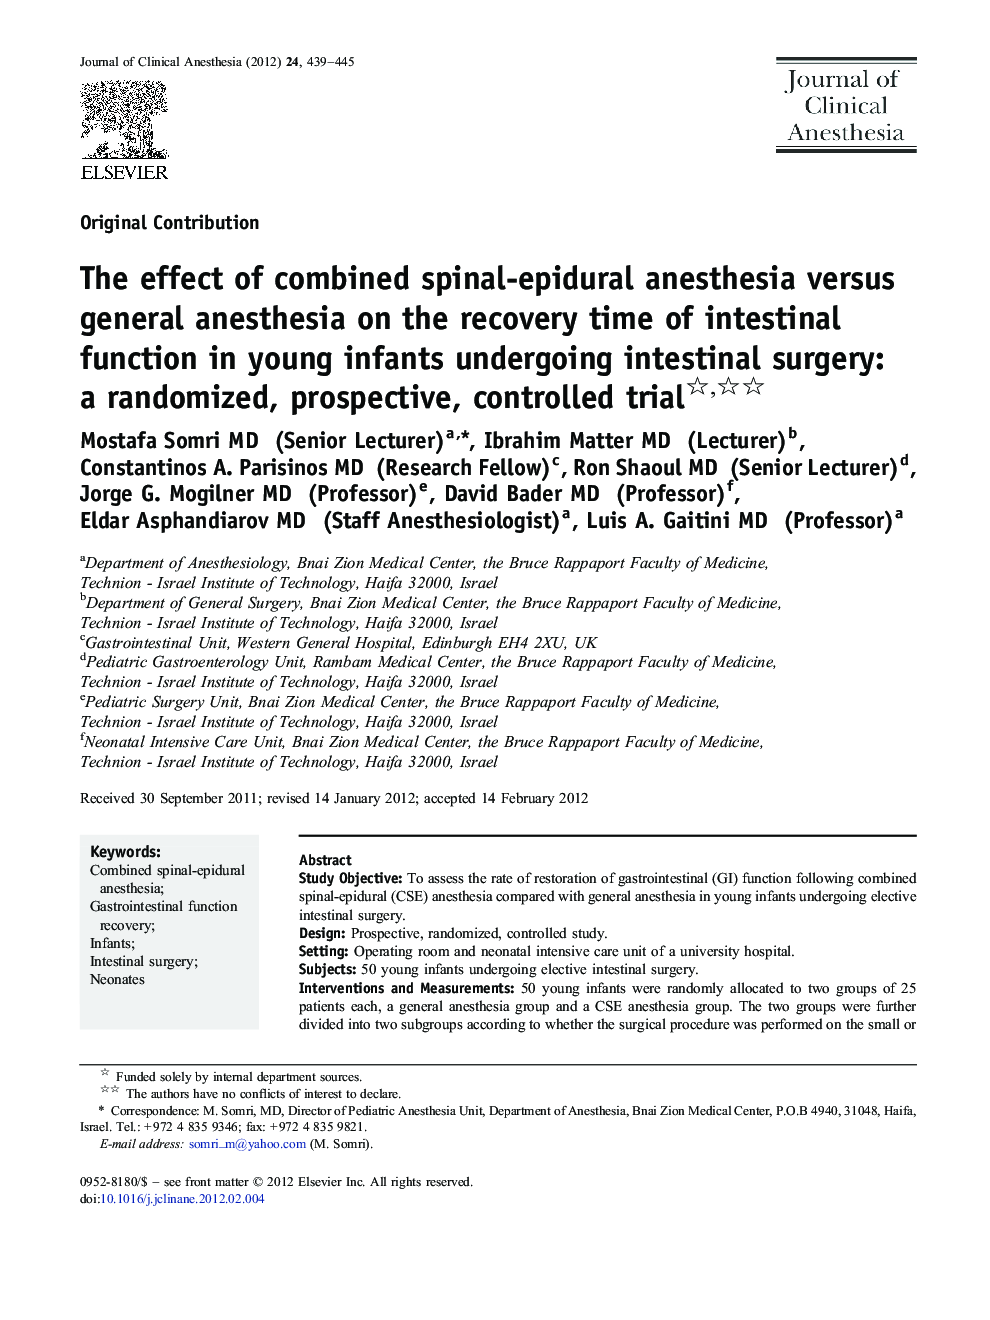 The effect of combined spinal-epidural anesthesia versus general anesthesia on the recovery time of intestinal function in young infants undergoing intestinal surgery: a randomized, prospective, controlled trial 